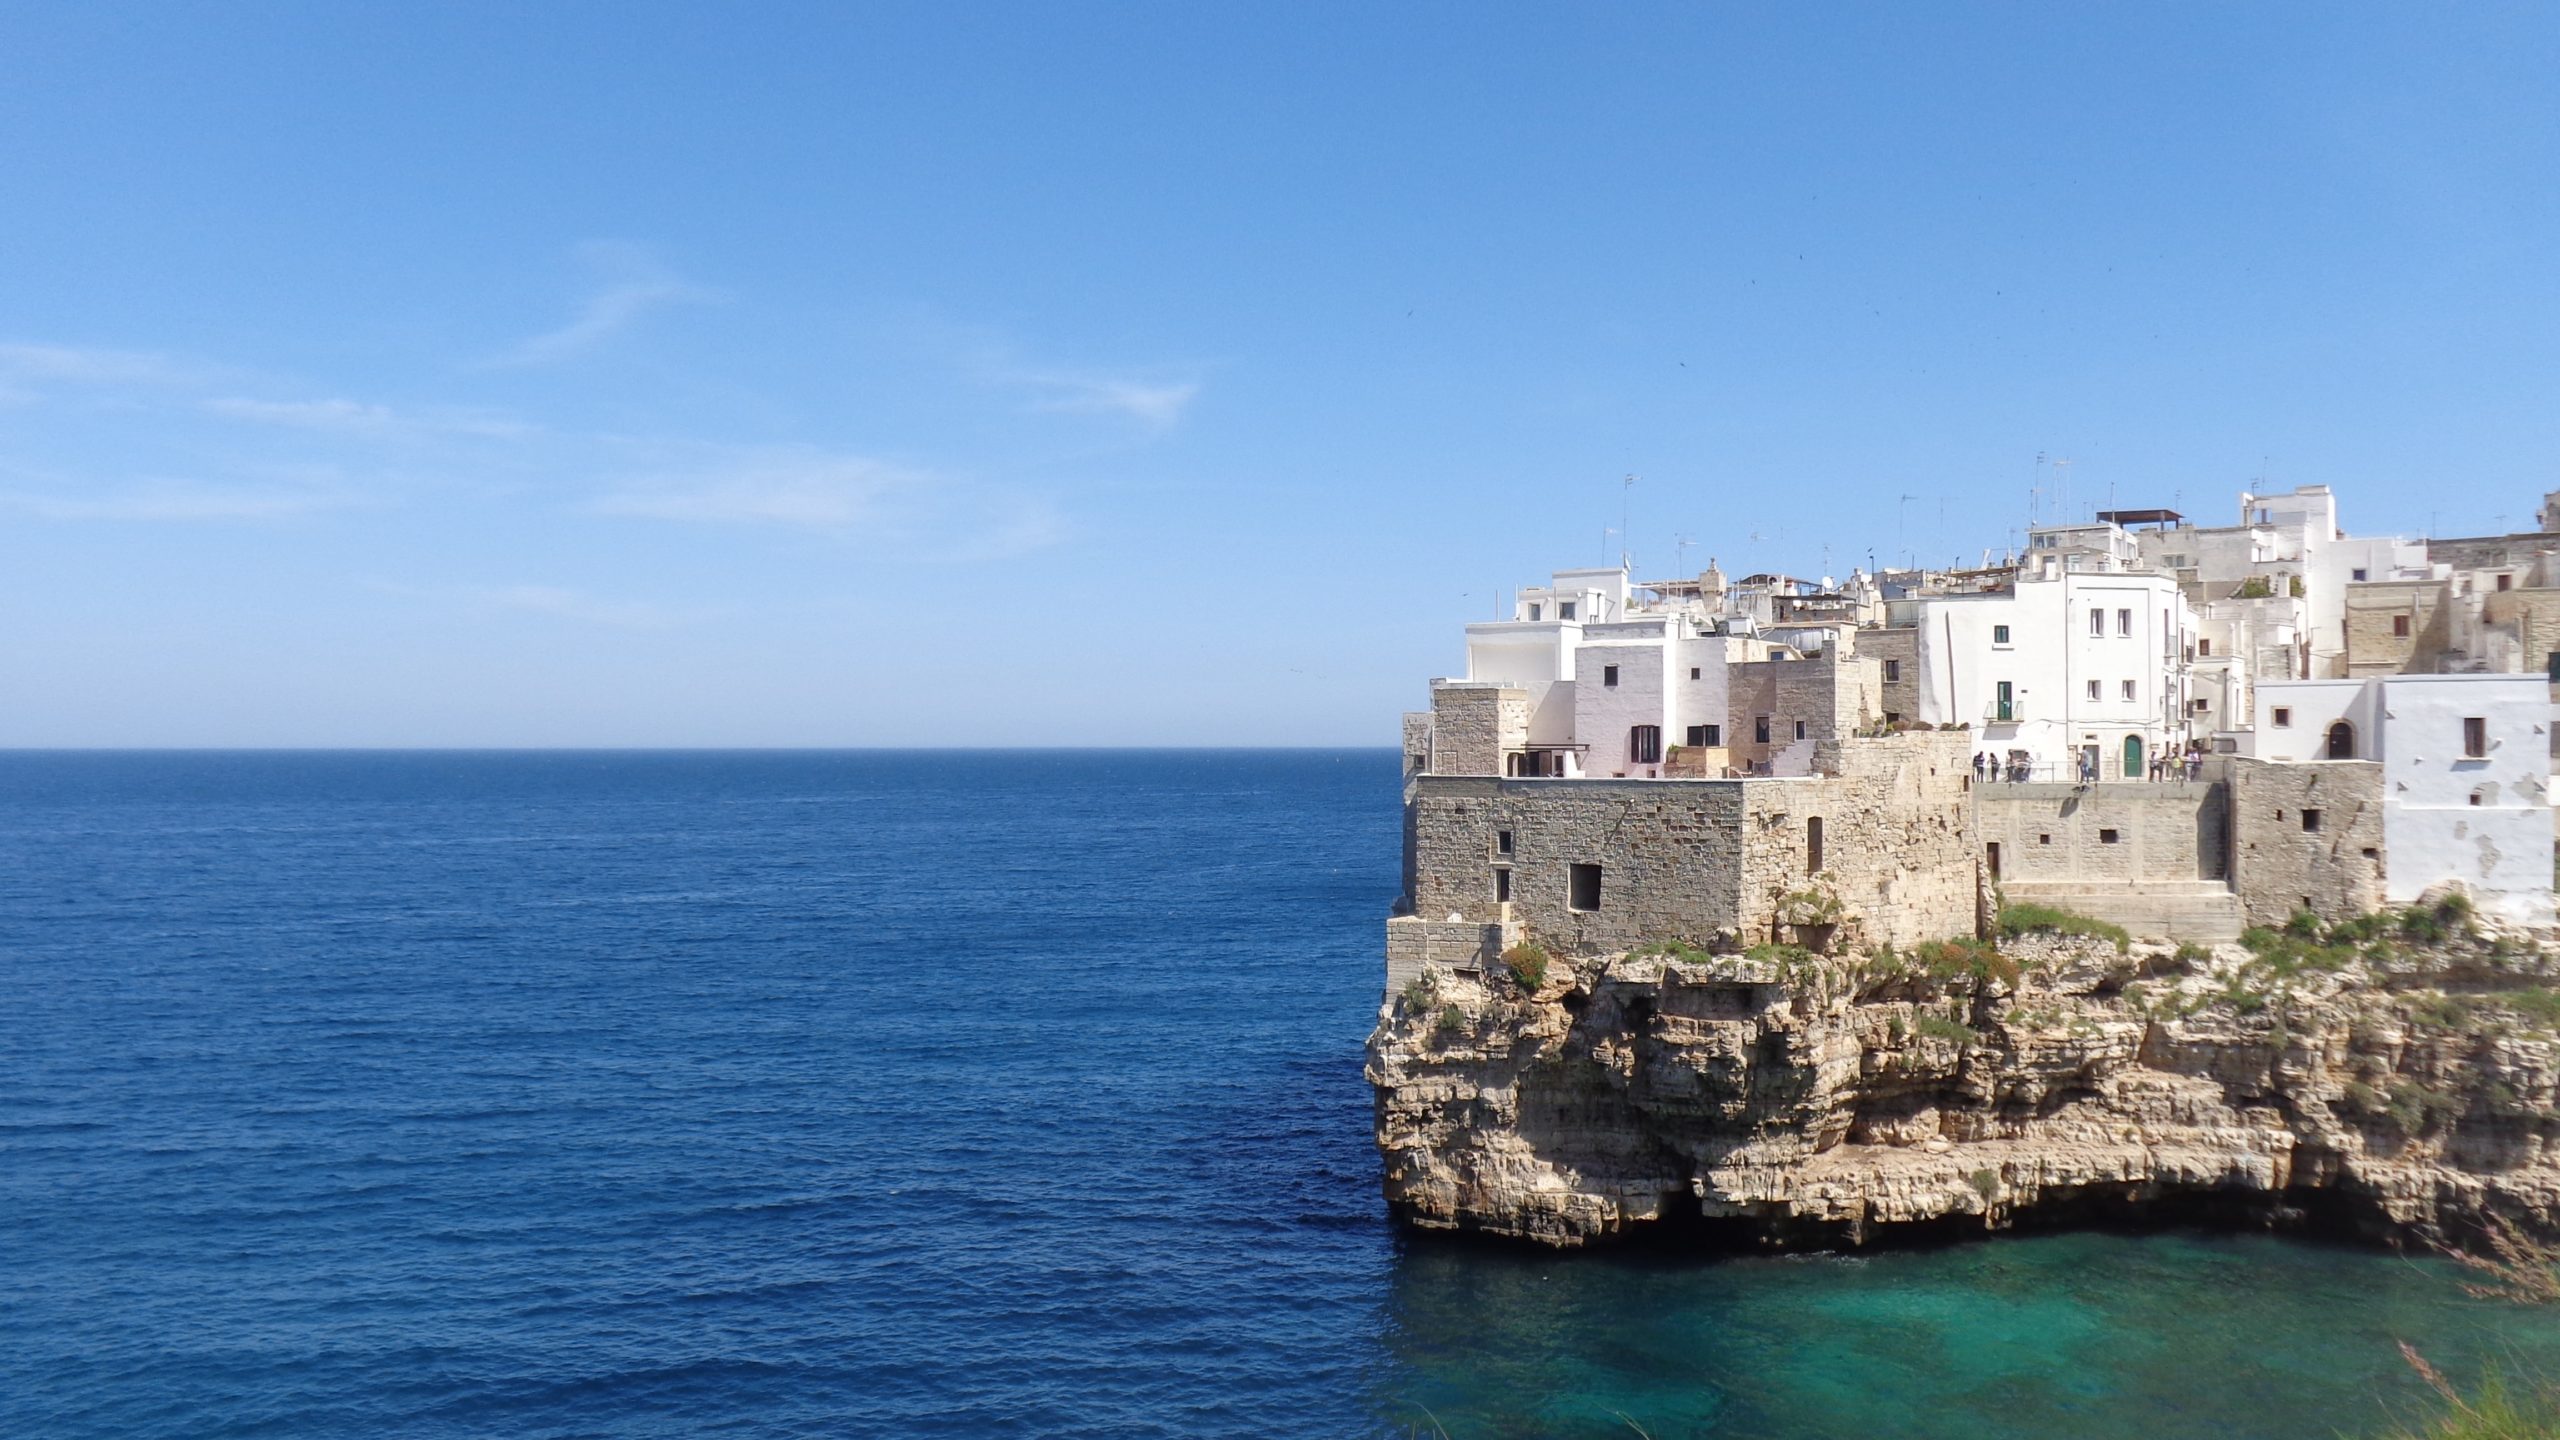 Cliffeside view of Polignano a mare